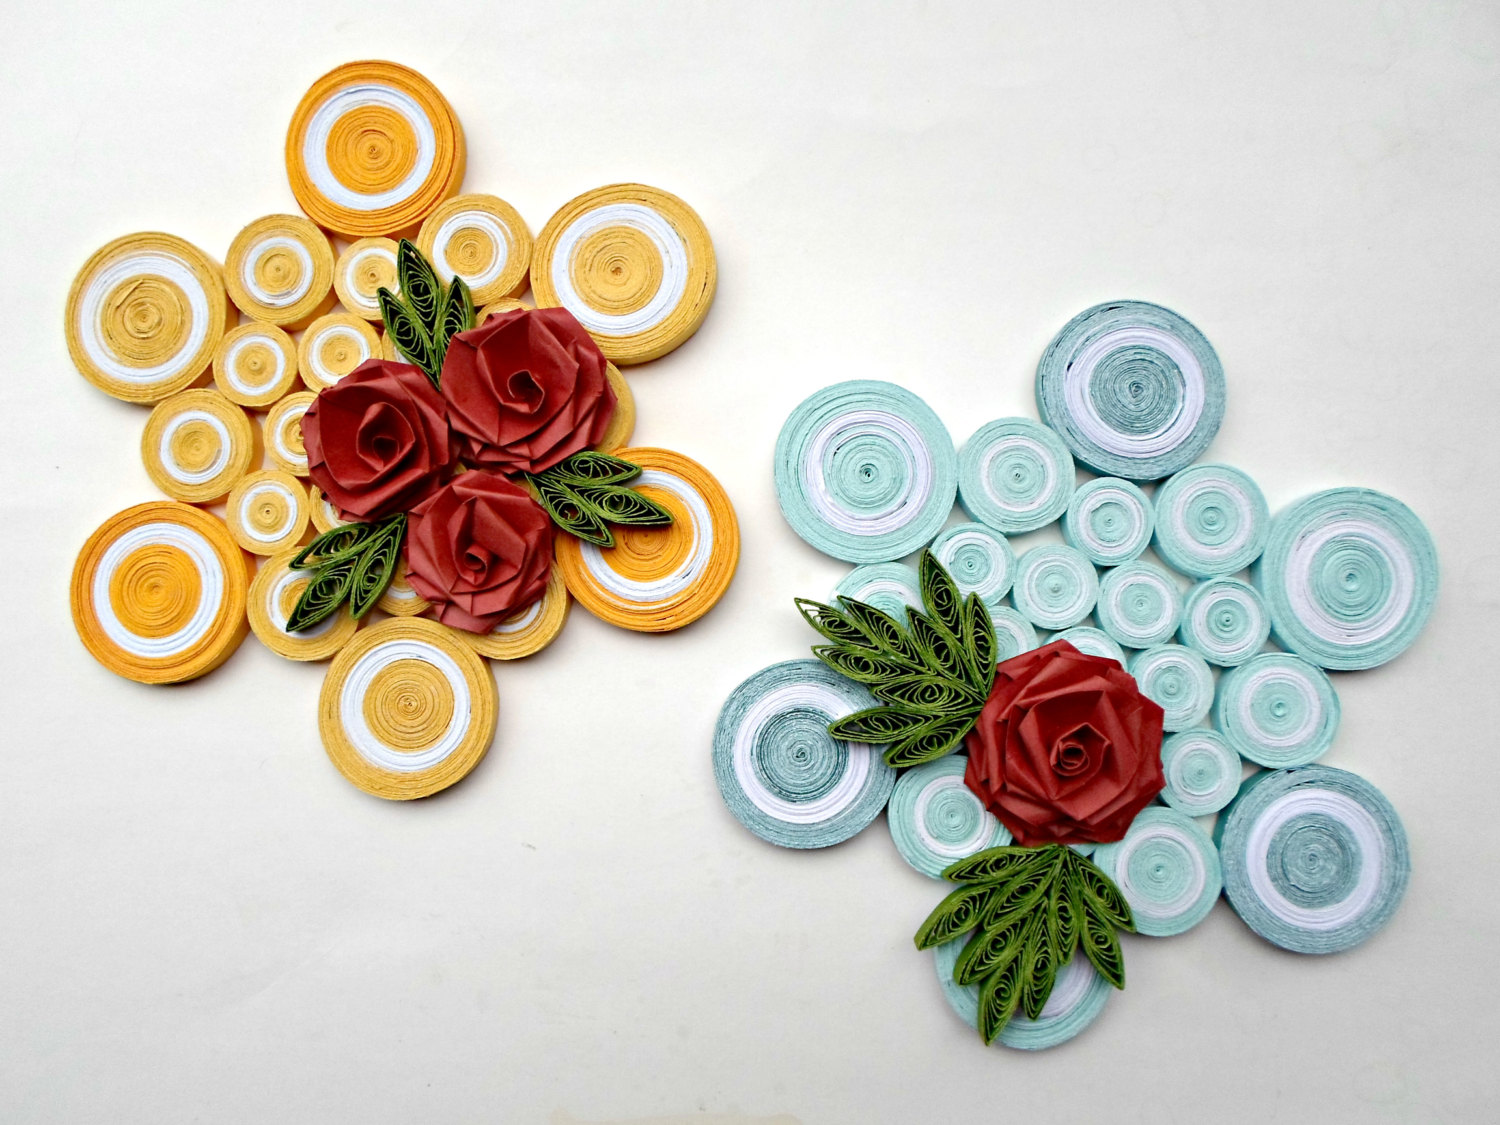  paper  quilling  rose wall  art easy crafts ideas to make